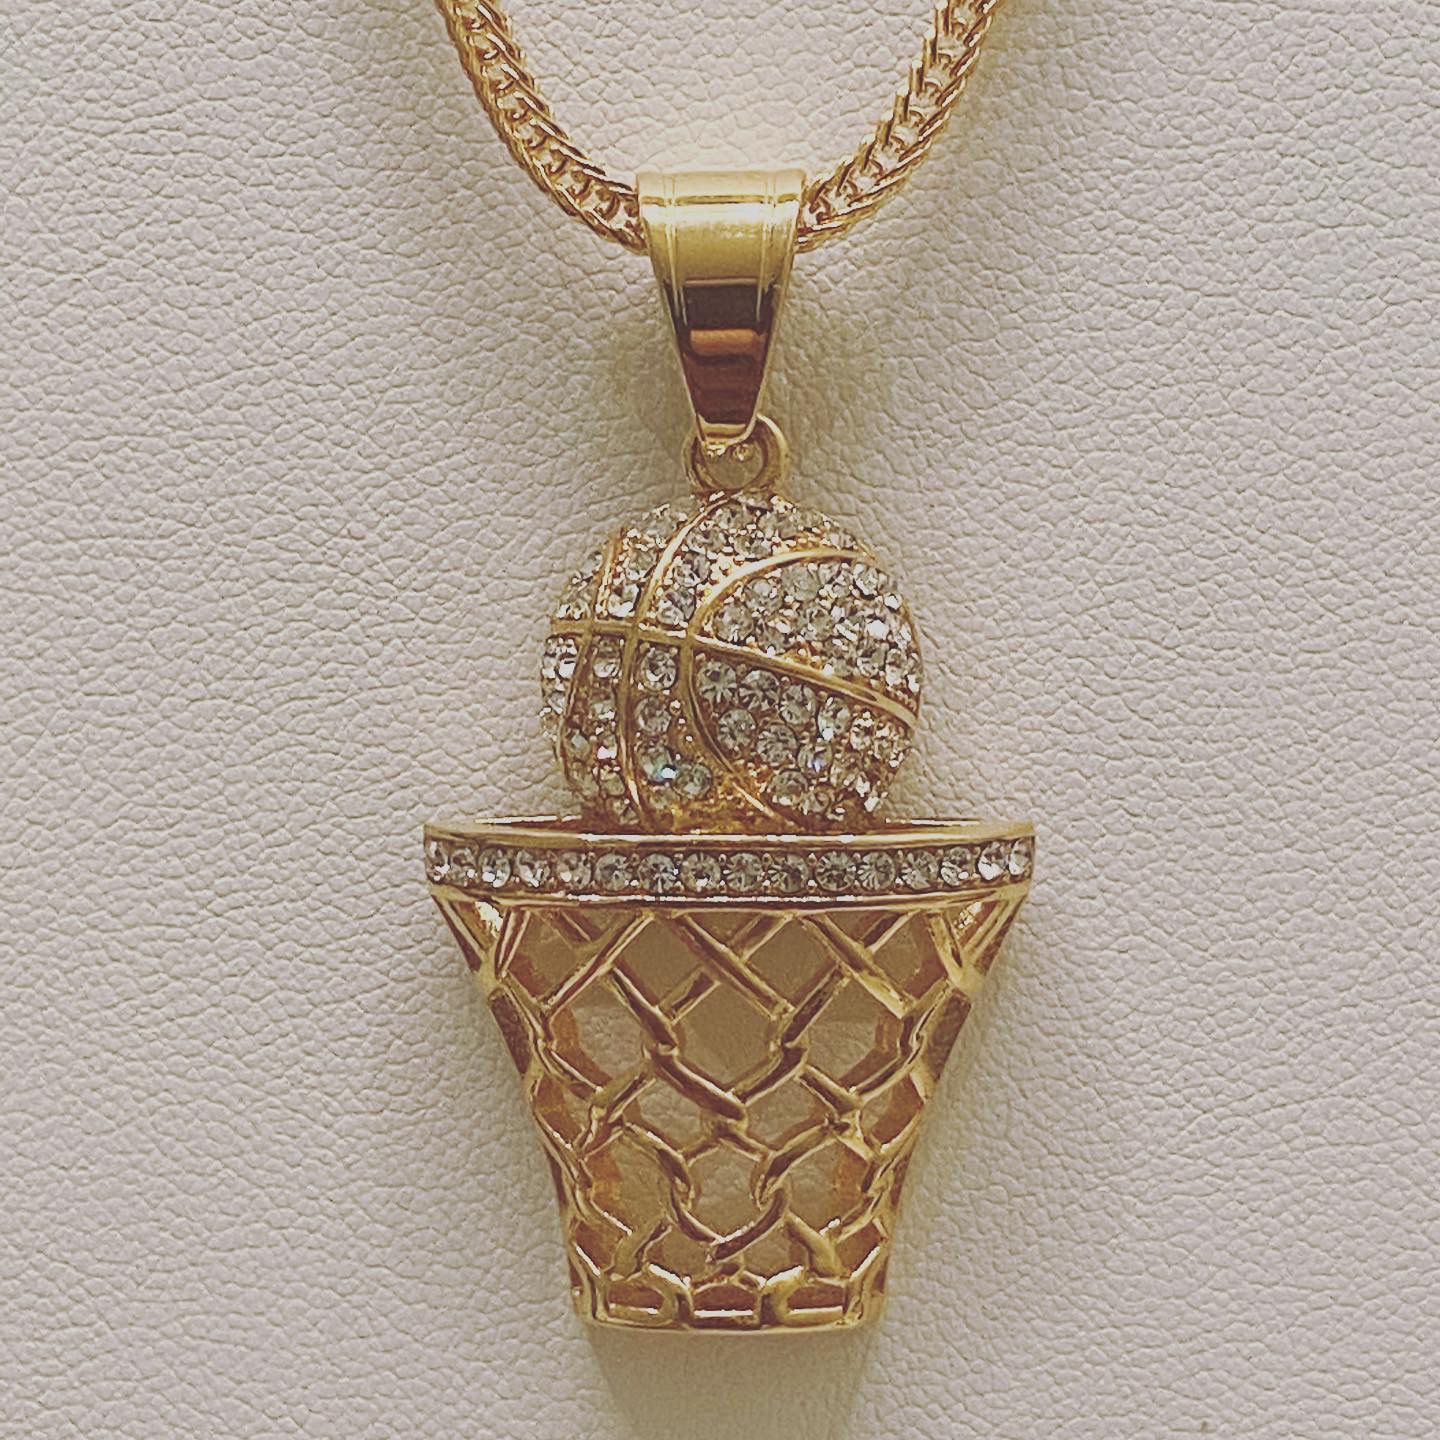 Gold stainless steel blinged basketball pendant with chain